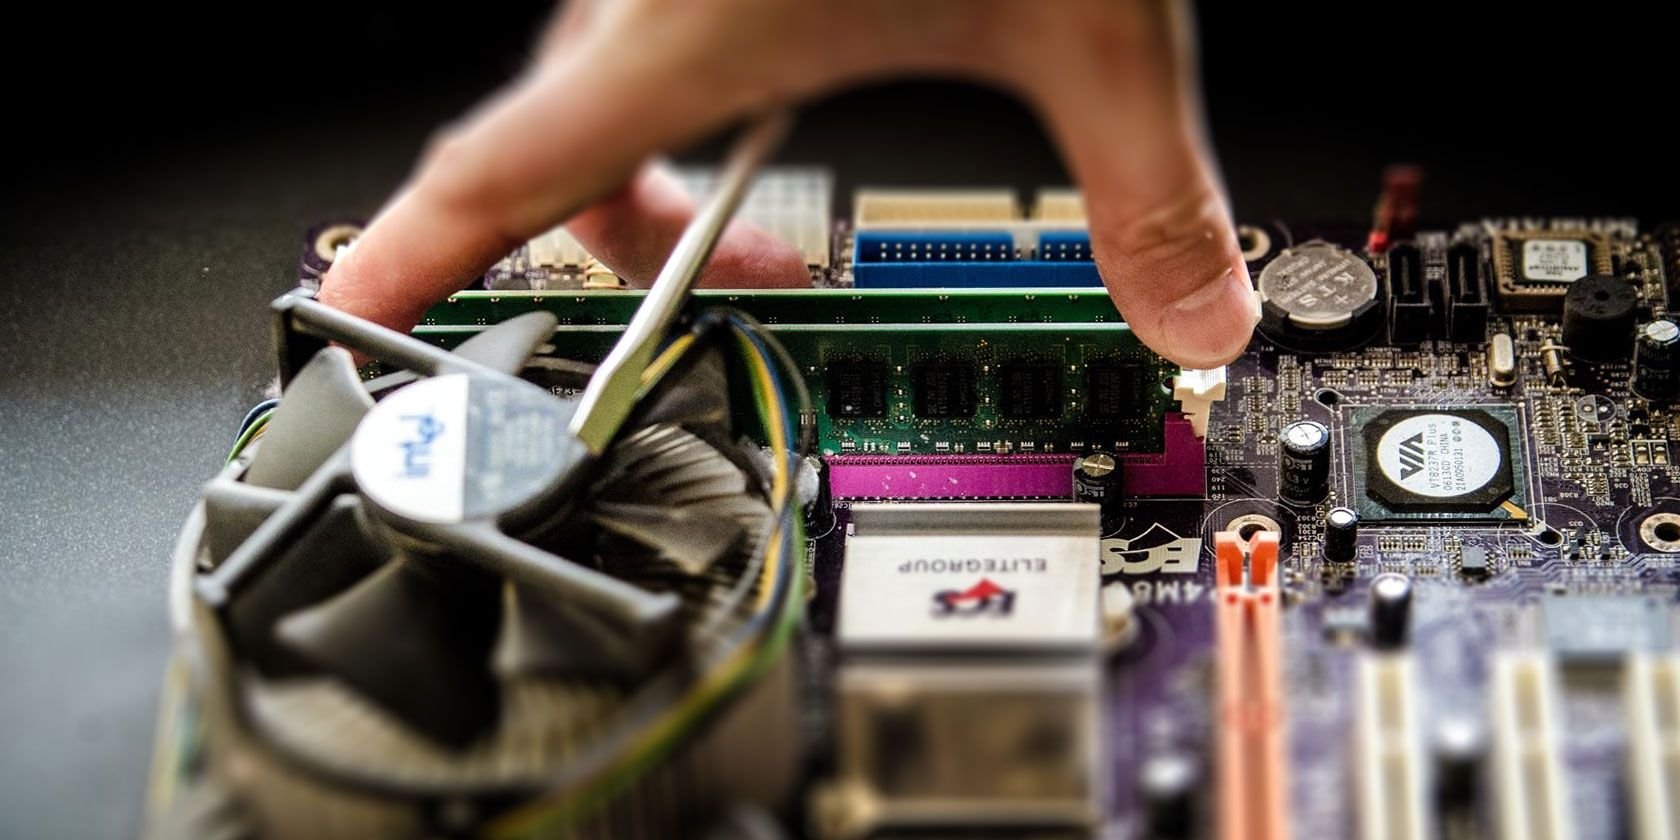 How to Reuse Old RAM Modules: 7 Things You Can Do